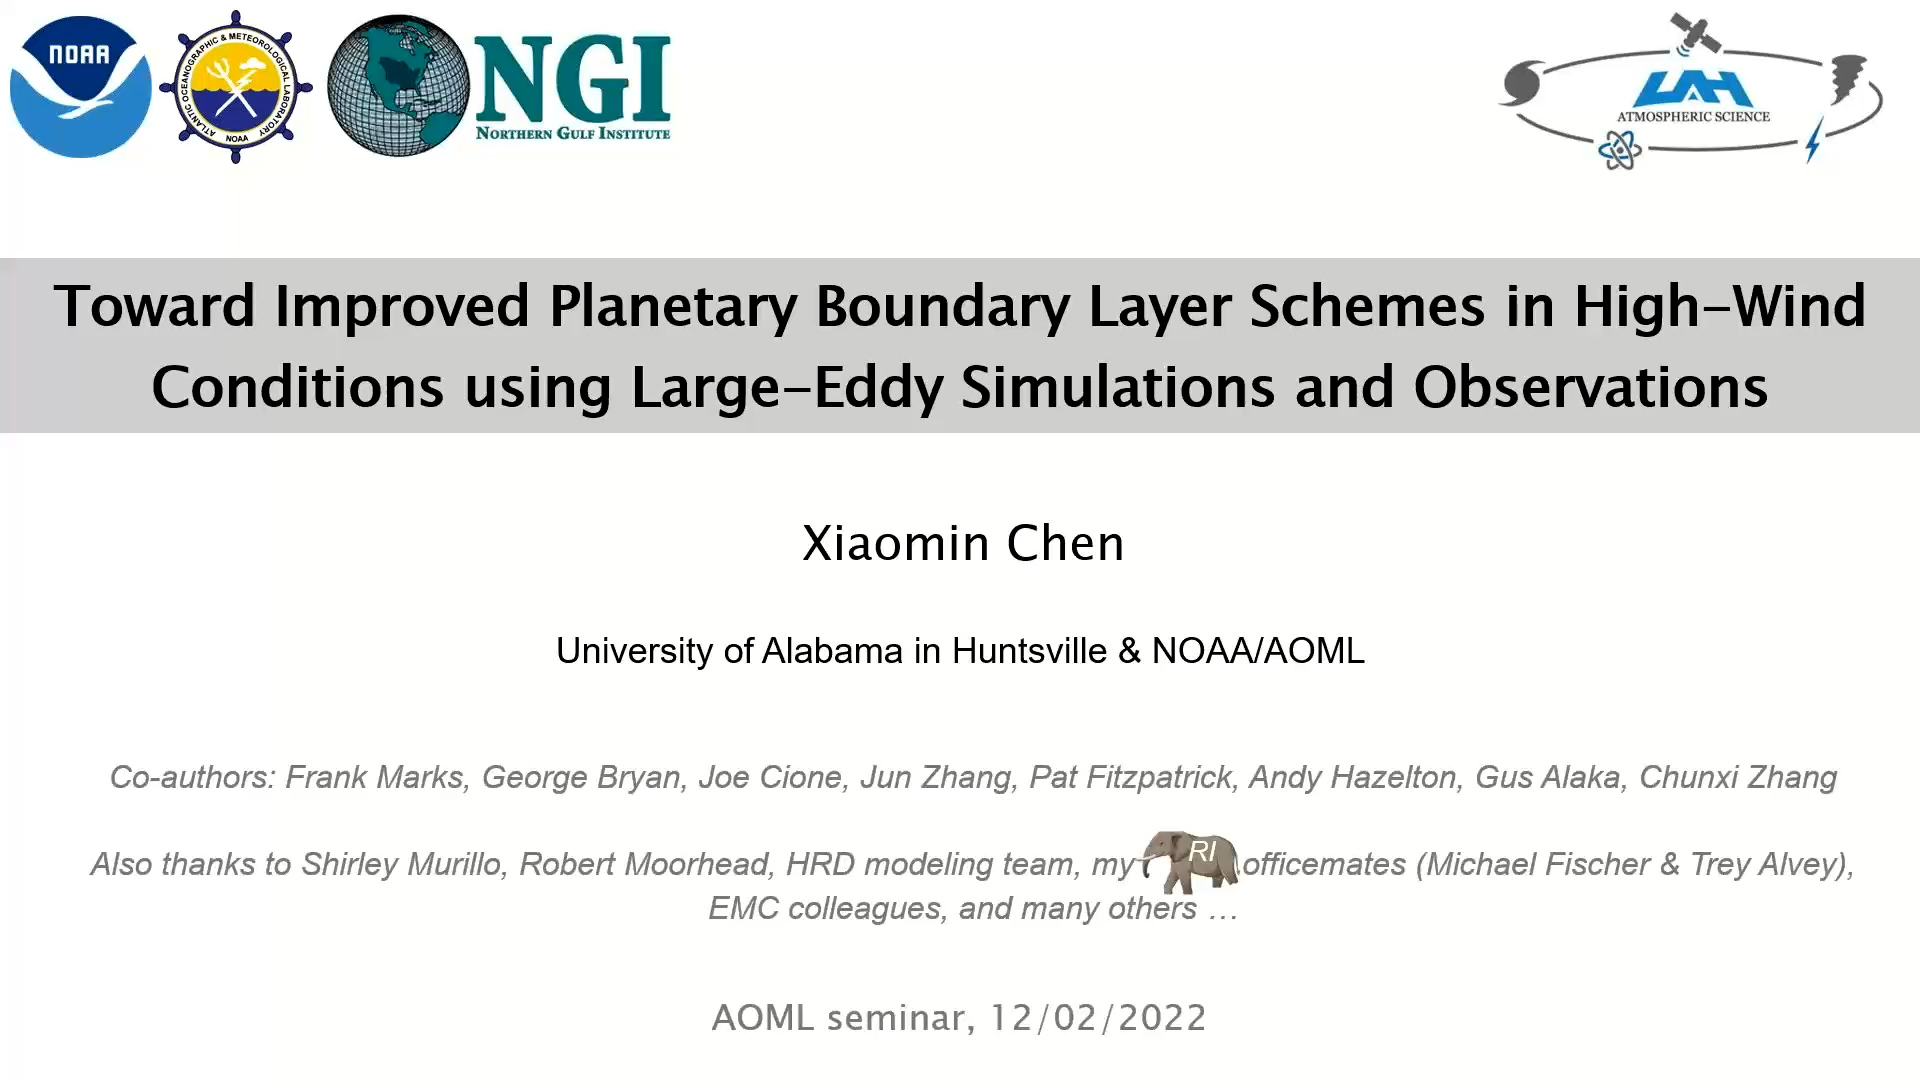 Video Thumnail para la serie de seminarios HRD: Dr Xiomin Chen, Toward Improved Planetary Boundary Layer Schemes in High-Wind COnditions Using Large-Eddy Simulations and Observations, 2 de diciembre de 2022